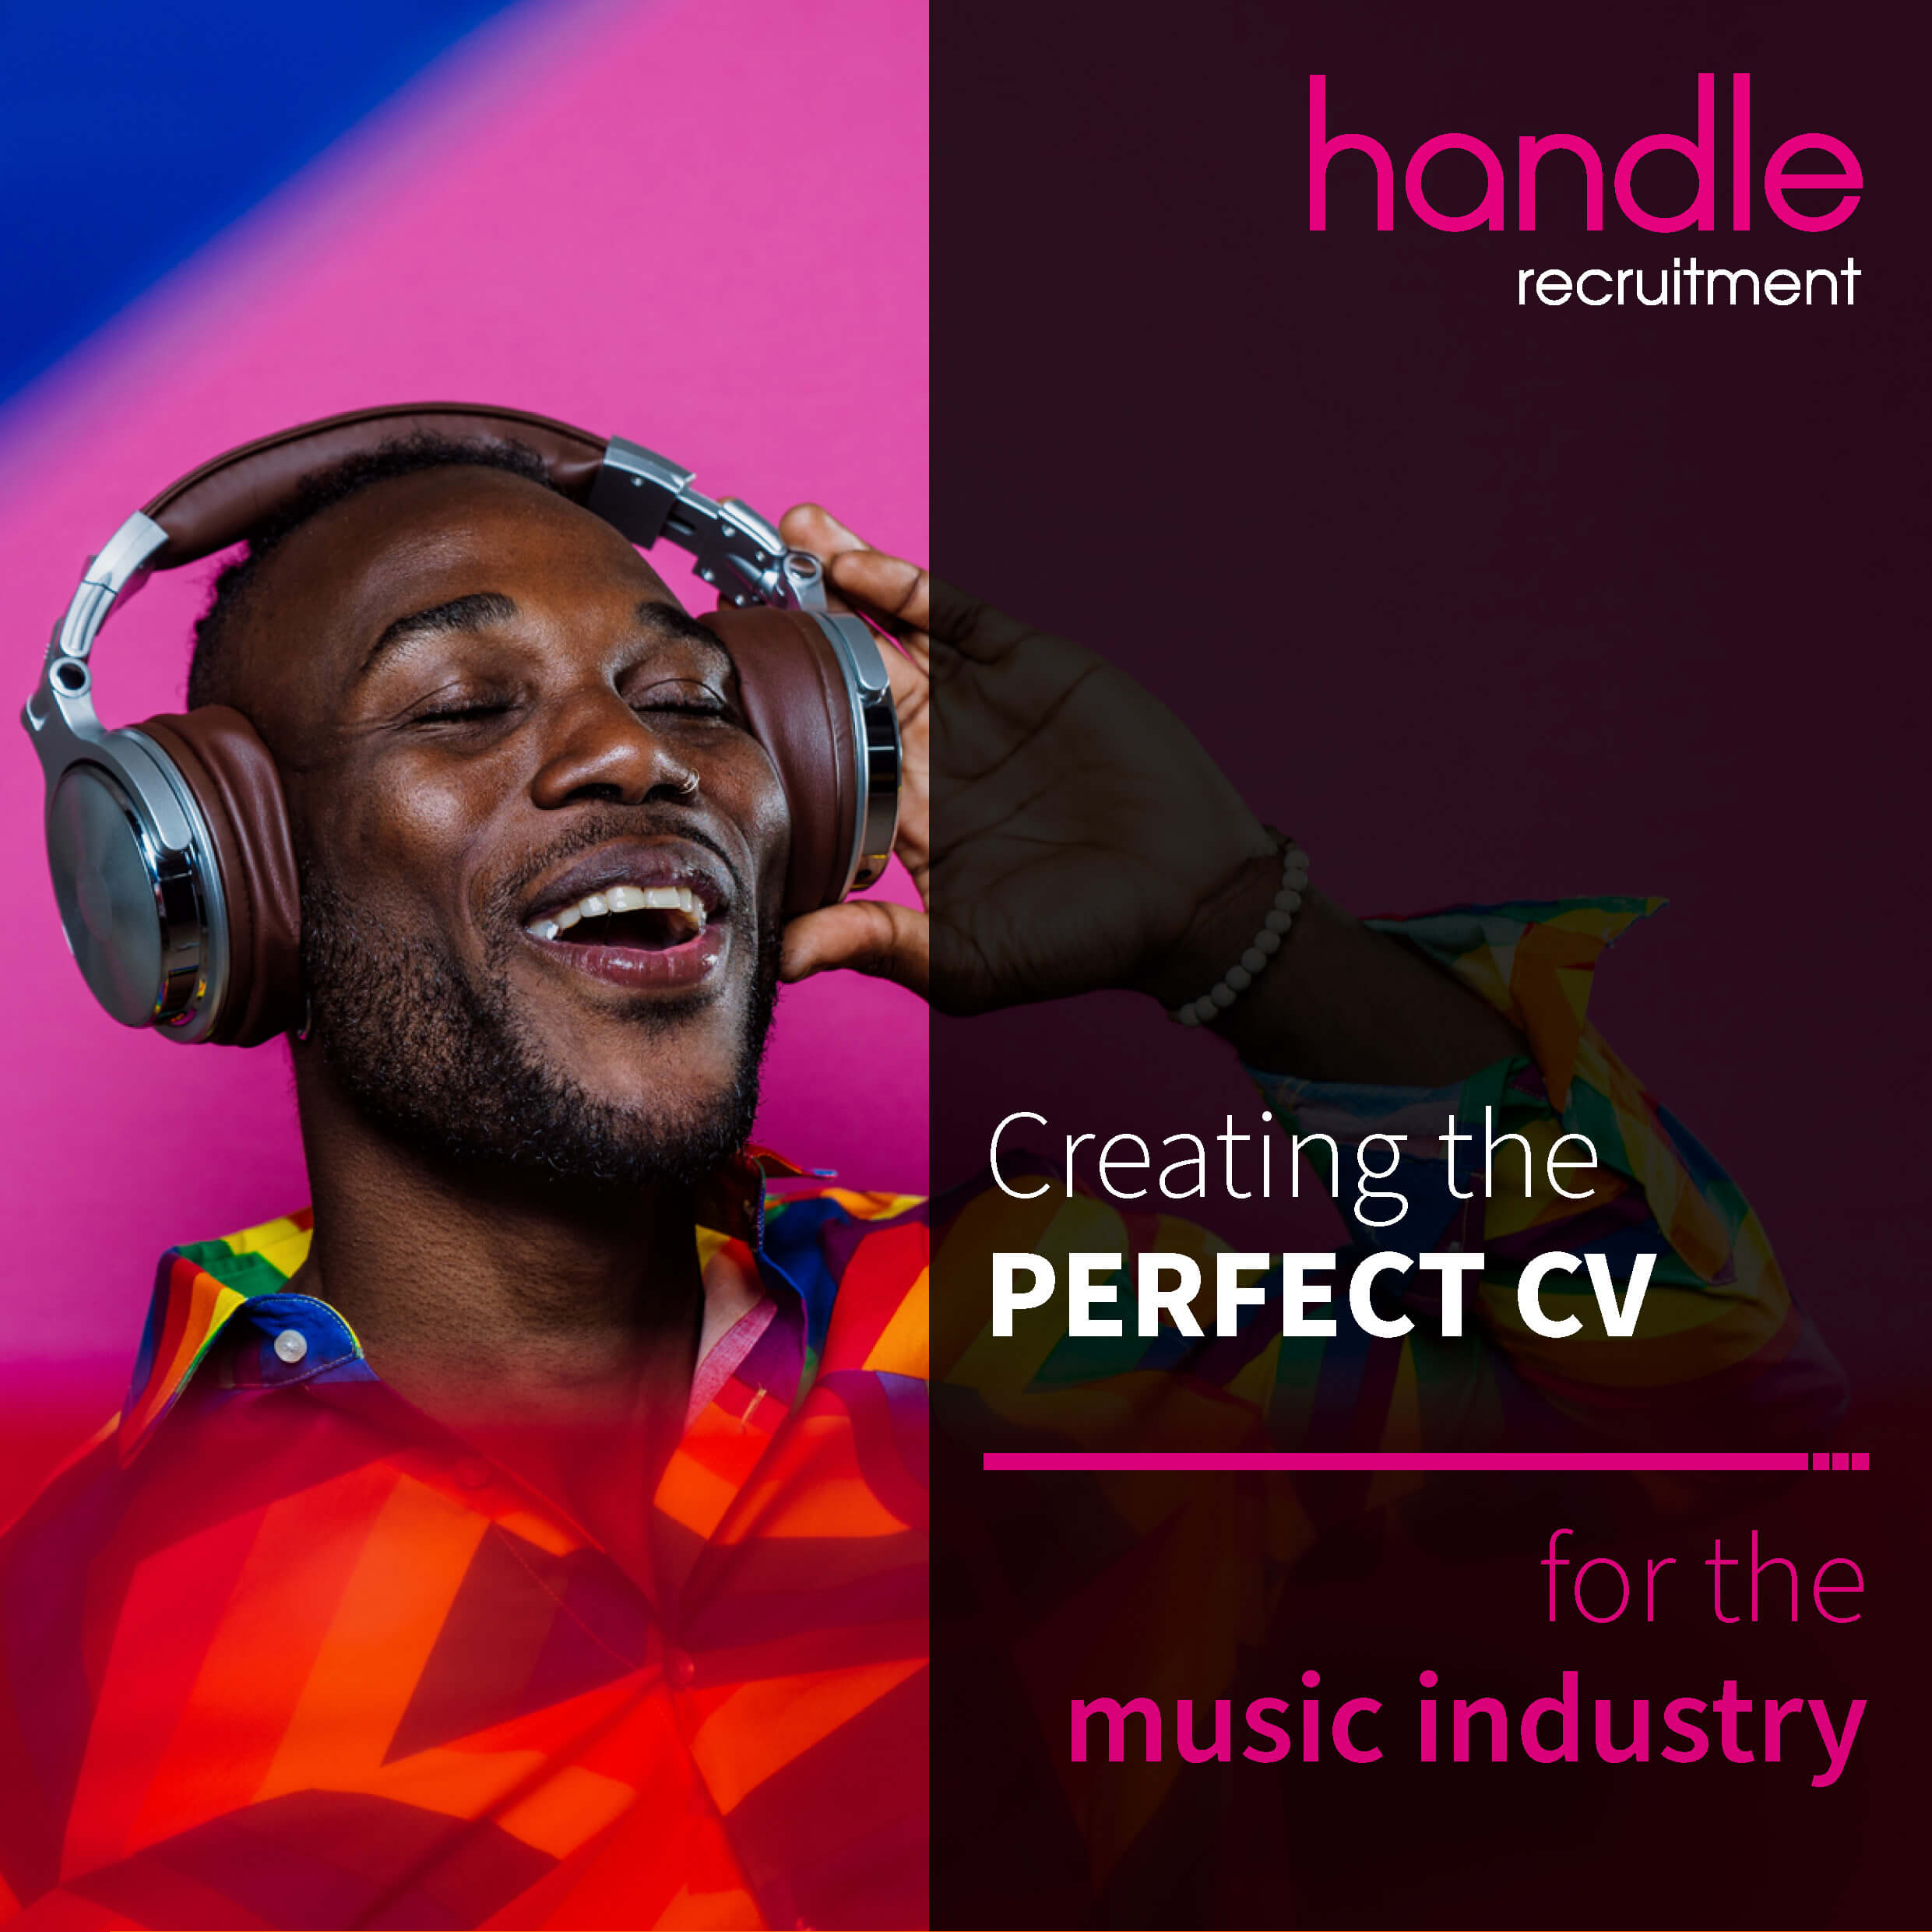 A guide to creating the perfect CV for the music industry